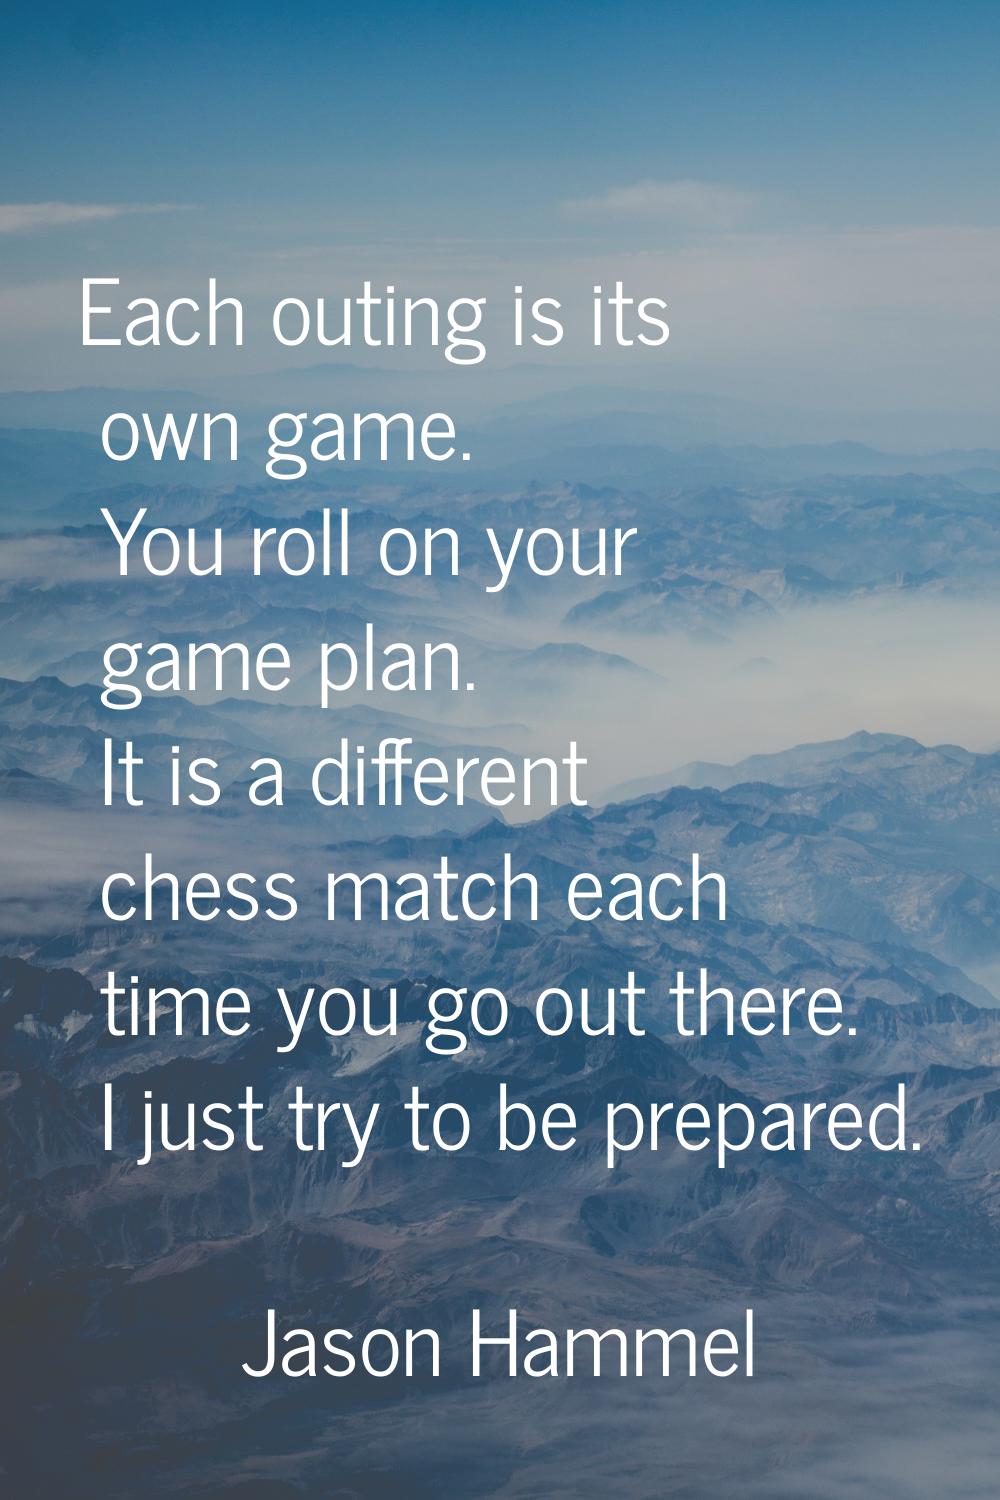 Each outing is its own game. You roll on your game plan. It is a different chess match each time yo